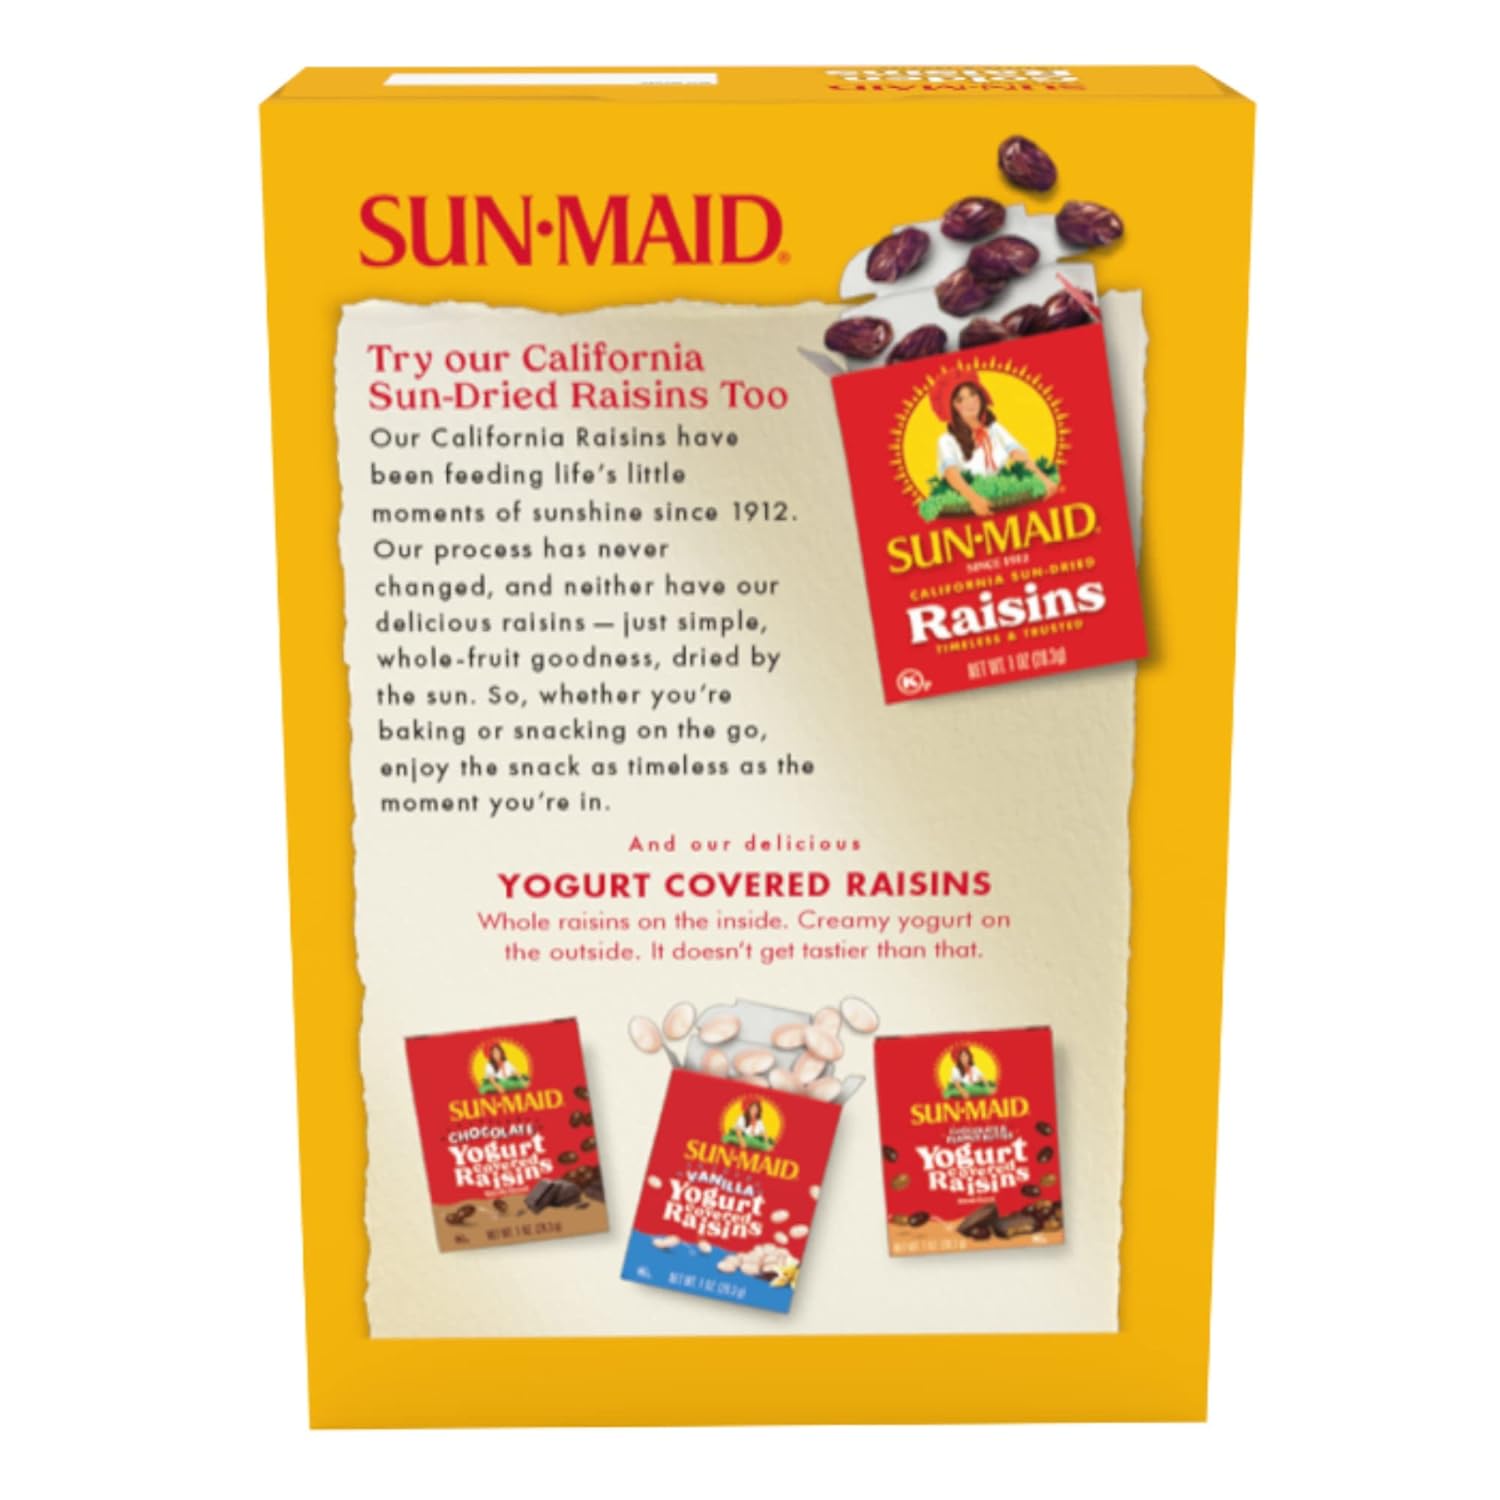 Sun-Maid California Golden Raisins - 12 oz Sharing-Size Box - Dried Fruit Snack for Lunches, Snacks, and Natural Sweeteners : Everything Else